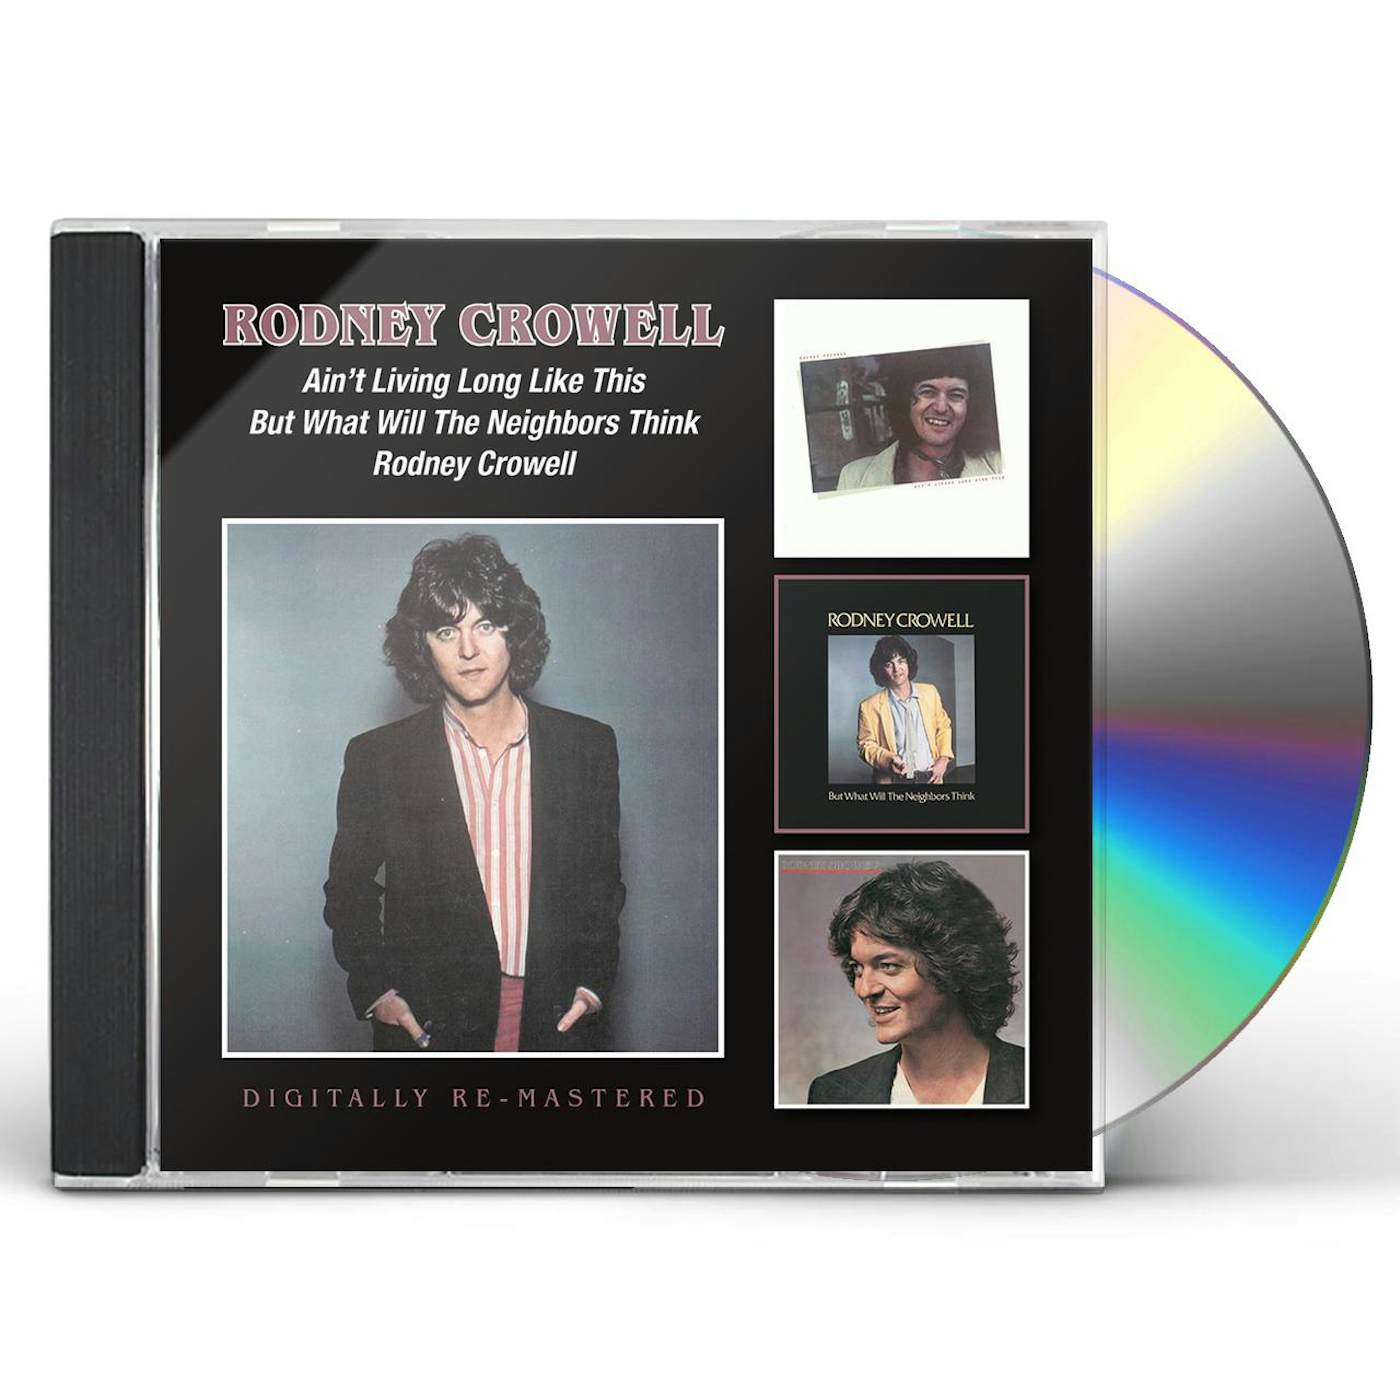 Rodney Crowell AIN'T LIVING LONG LIKE THIS CD